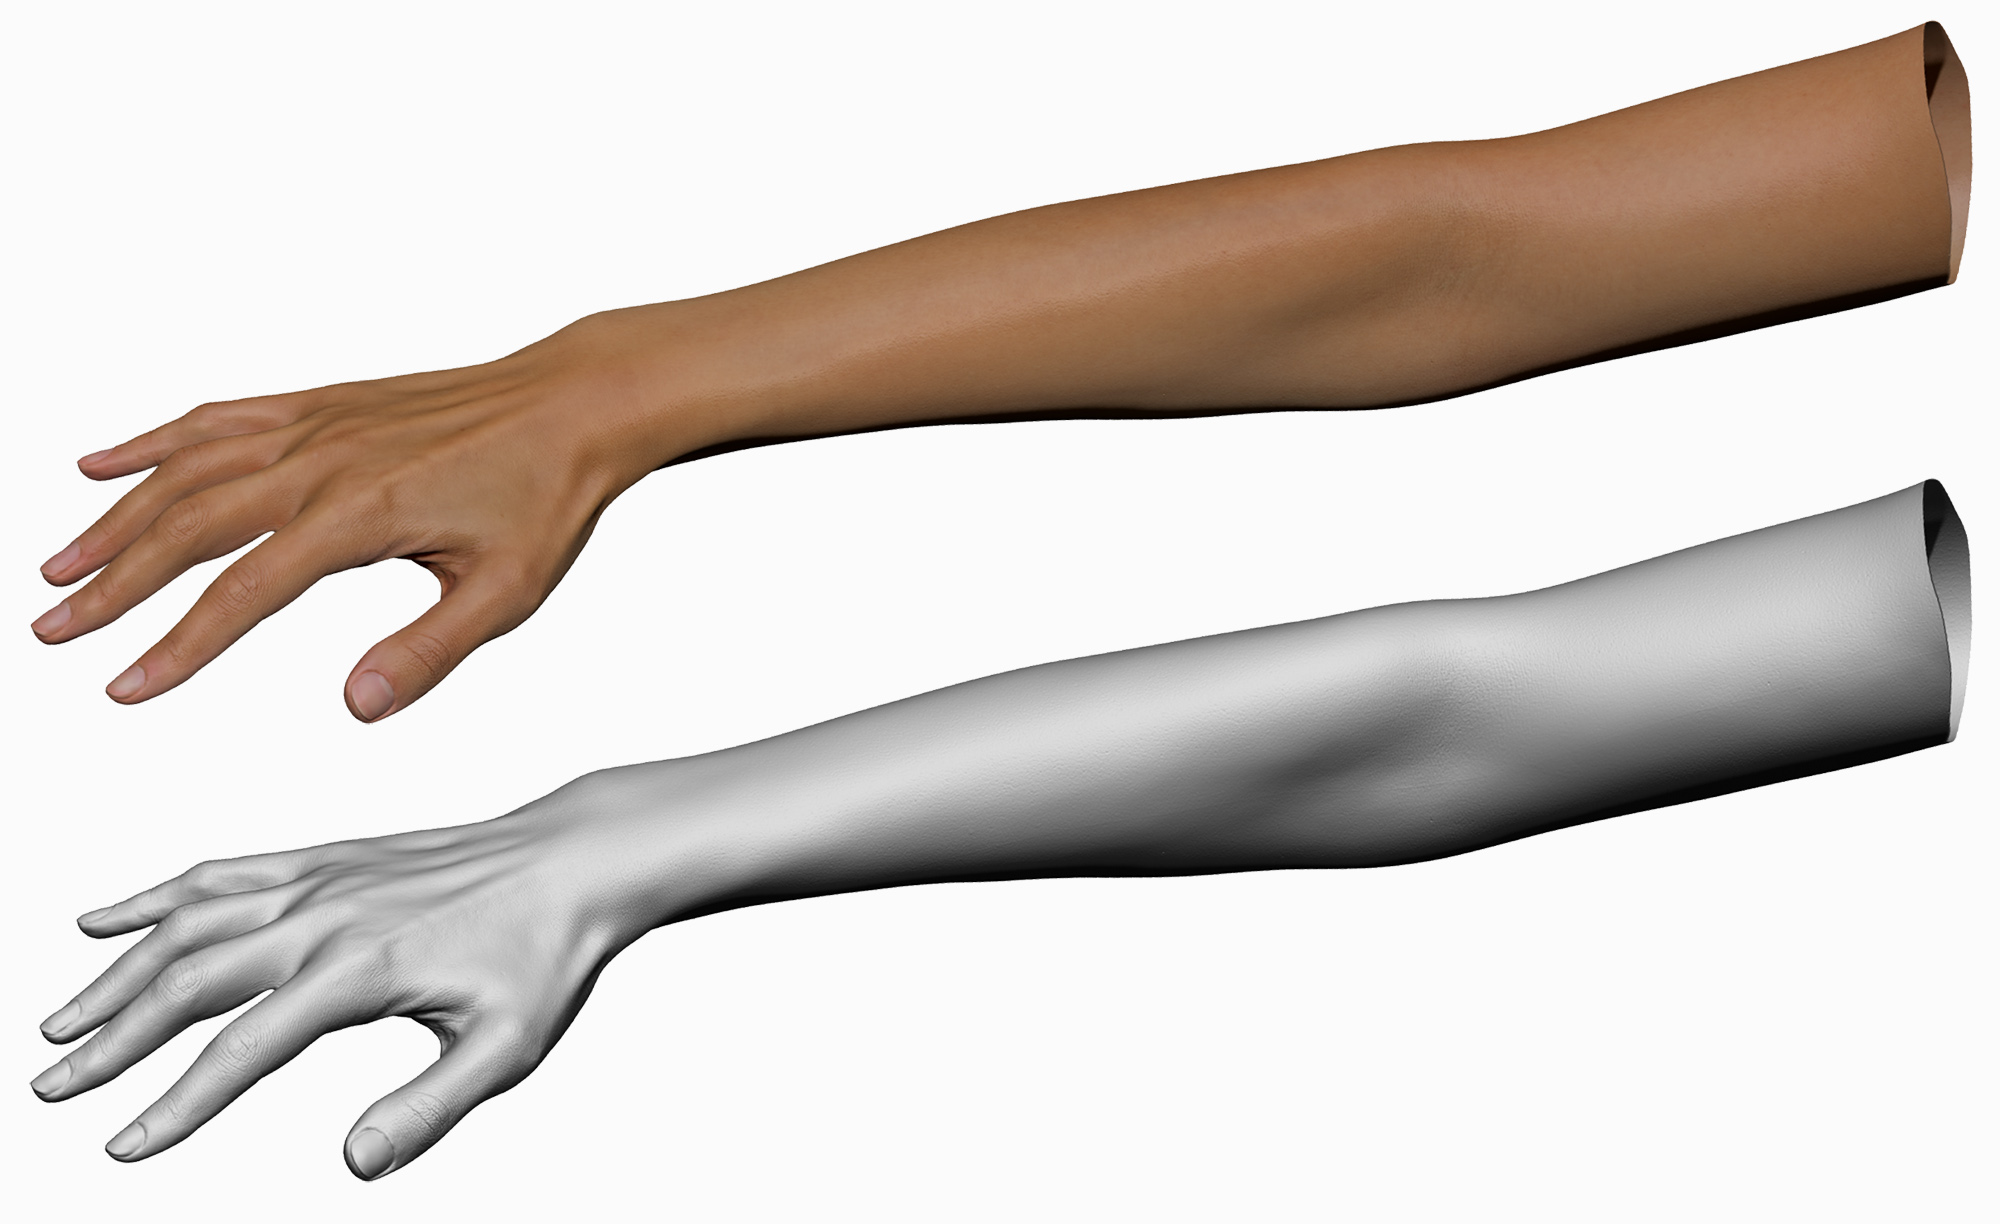 Asian Female 3d hand model arm hand scan 20 years old